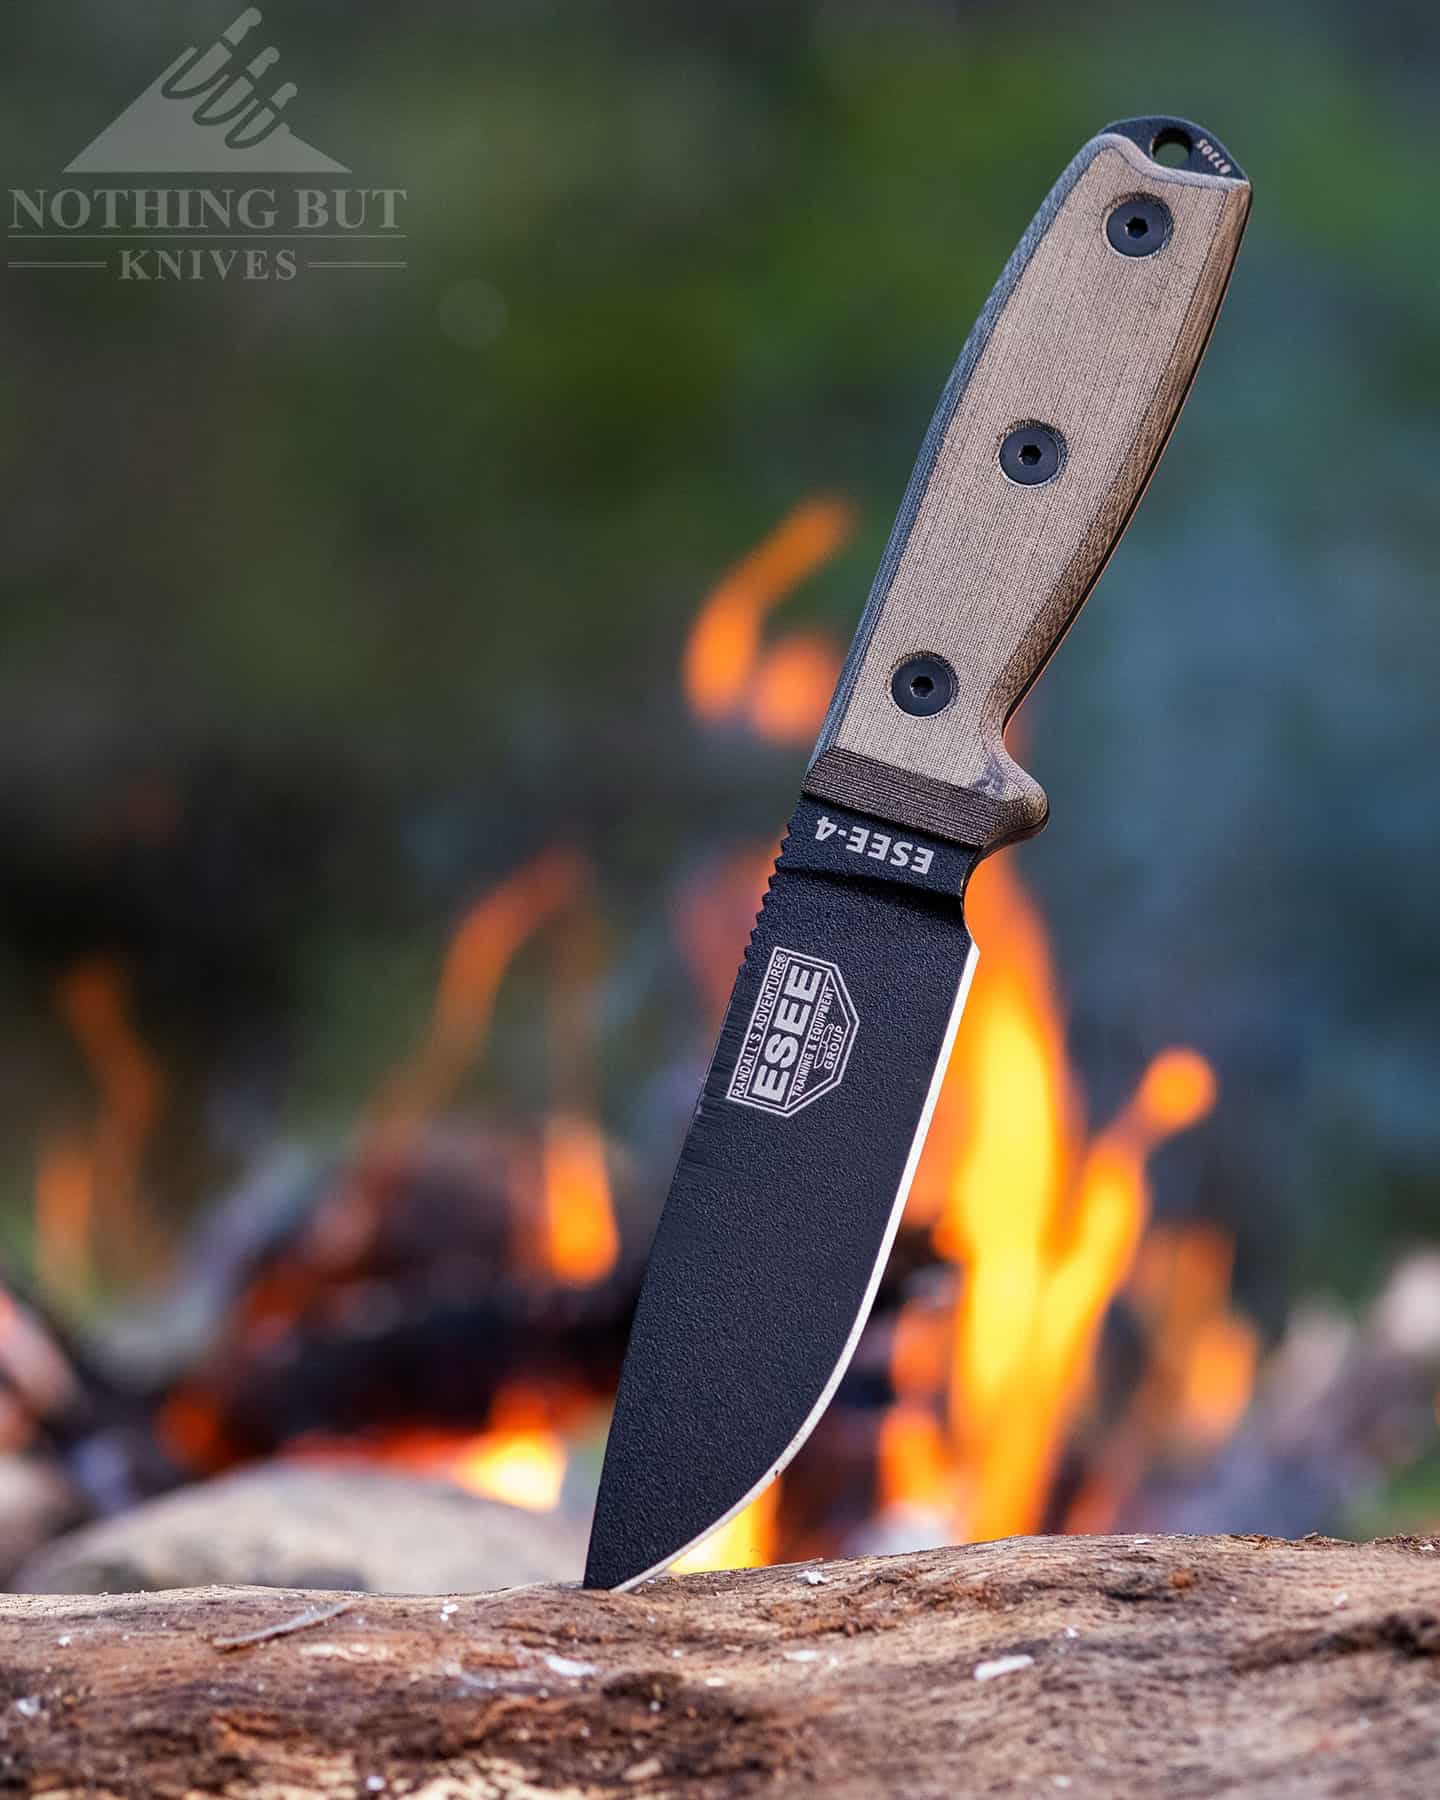 The Best Camping Knife for the Outdoors